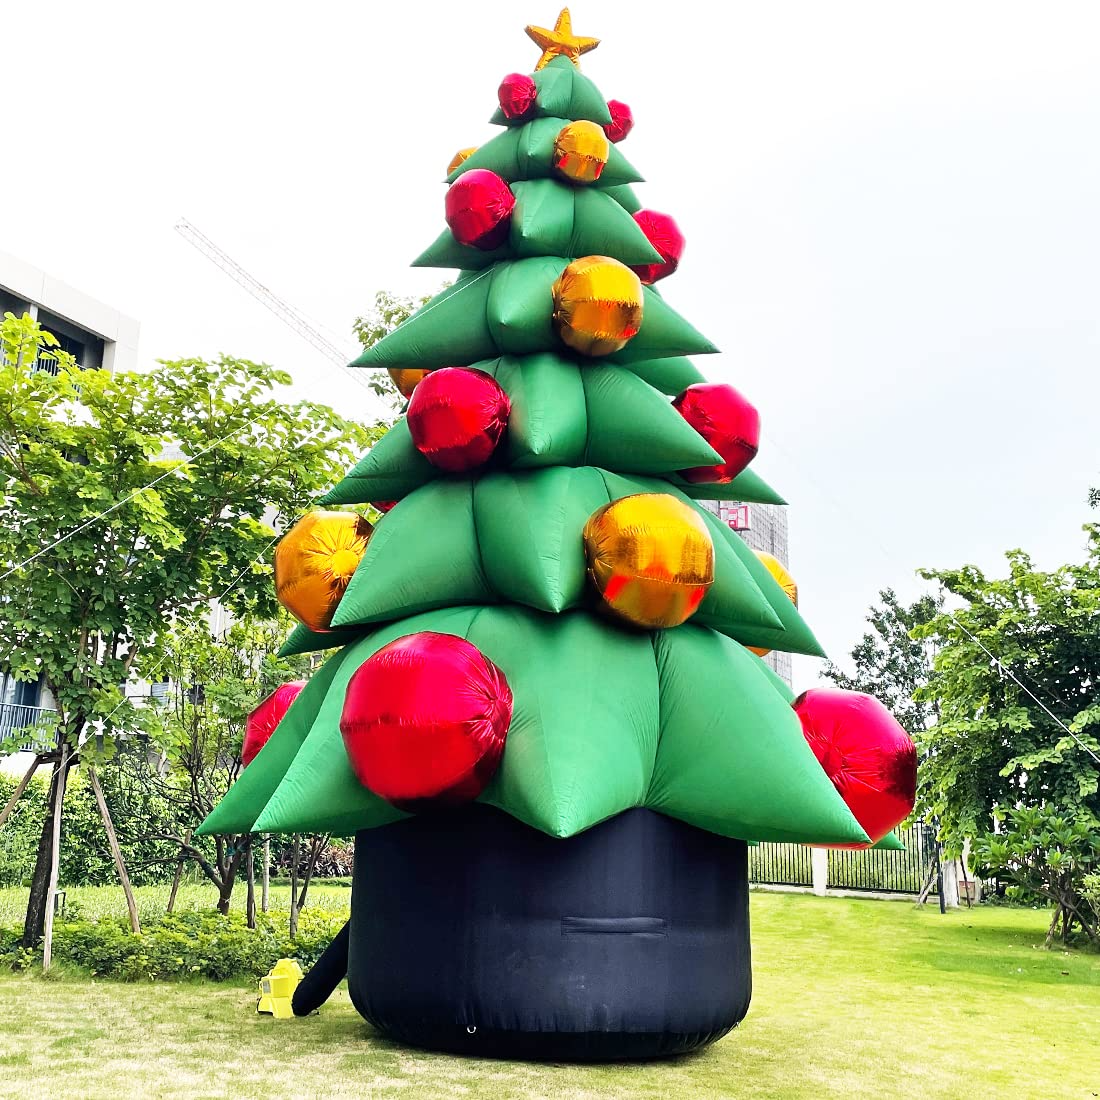 26Ft Tall Inflatable Green Christmas Tree with Multicolor Gift Boxes and Star - Outdoor Indoor Holiday Party Yard Decoration with No Light